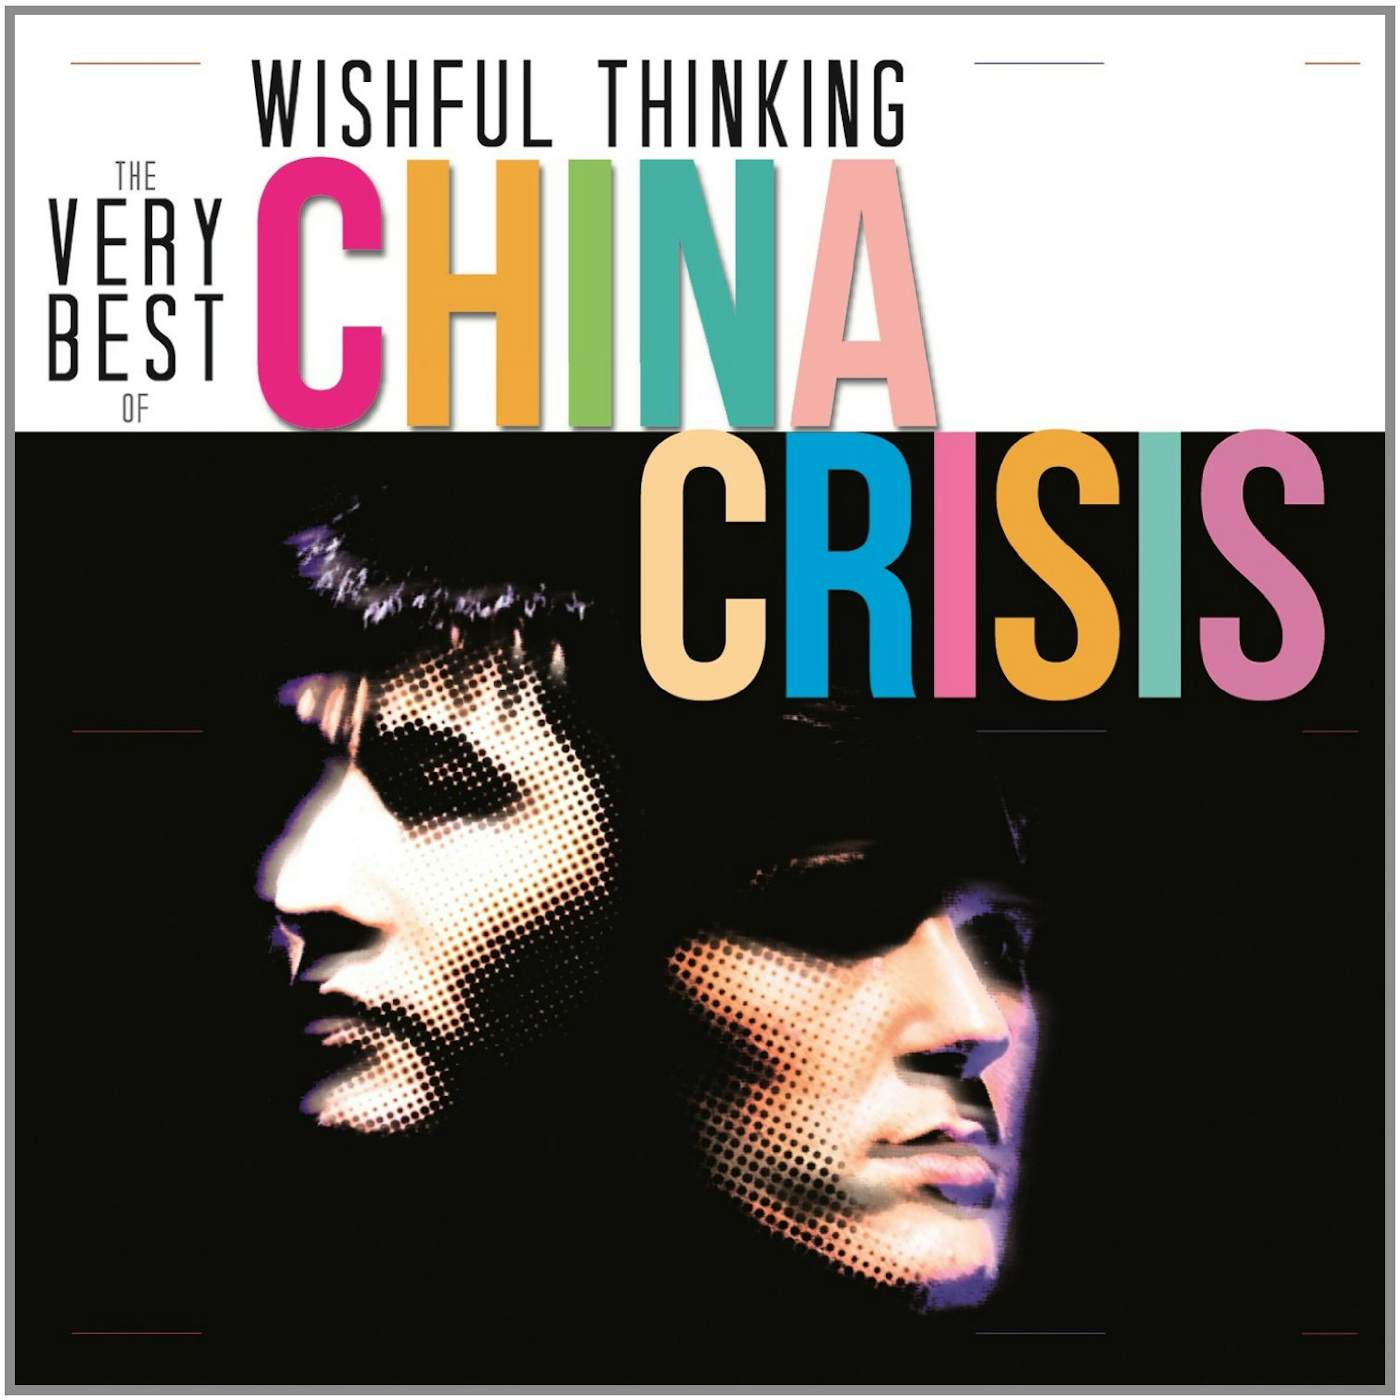 WISHFUL THINKING: THE CHINA CRISIS COLLECTION CD